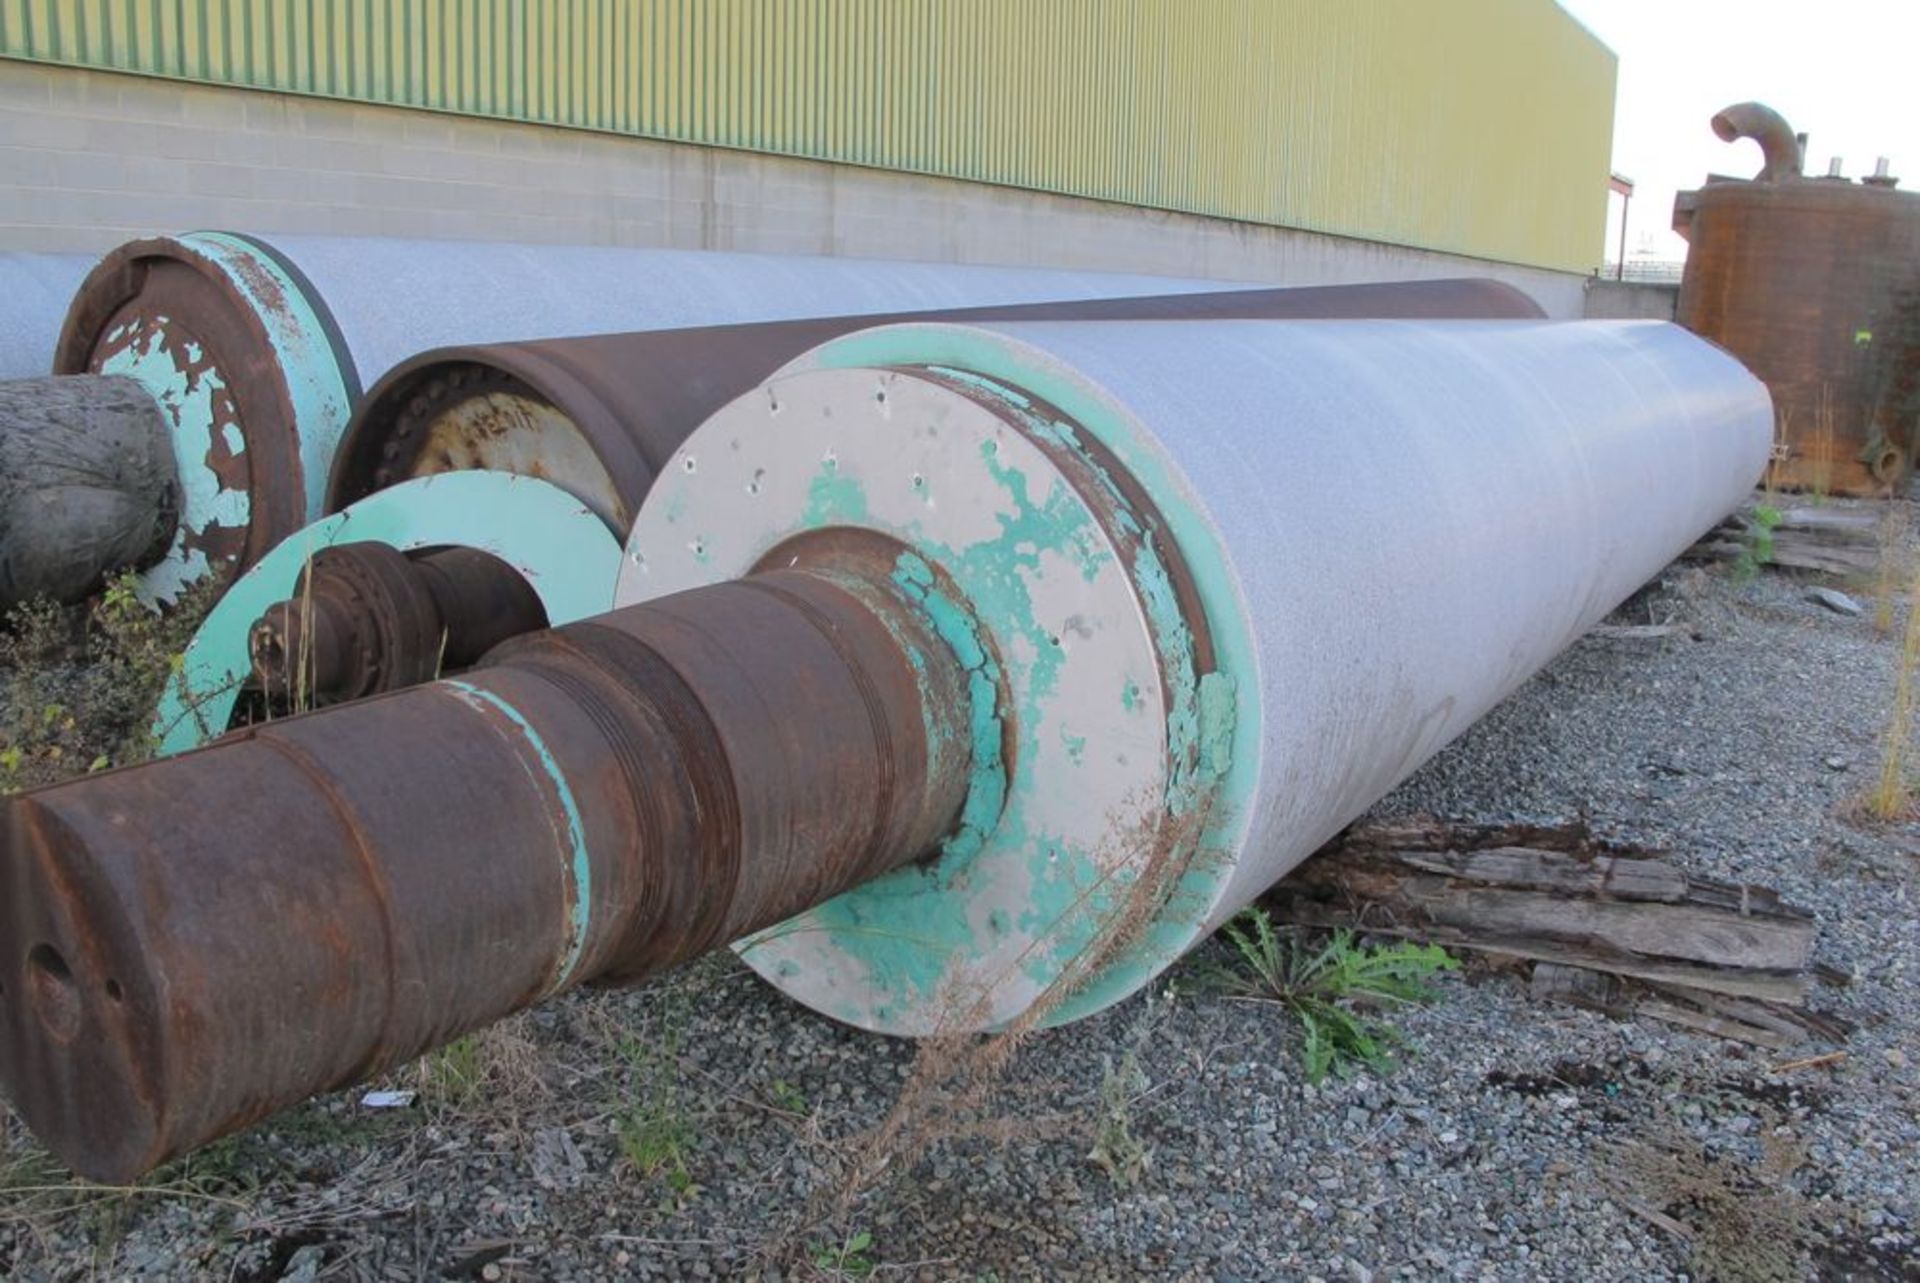 METAL AND GRANITE PRESS ROLLER, APPROX 30'L (NORTH OF 50 WHSE - IN YARD) - Image 2 of 2